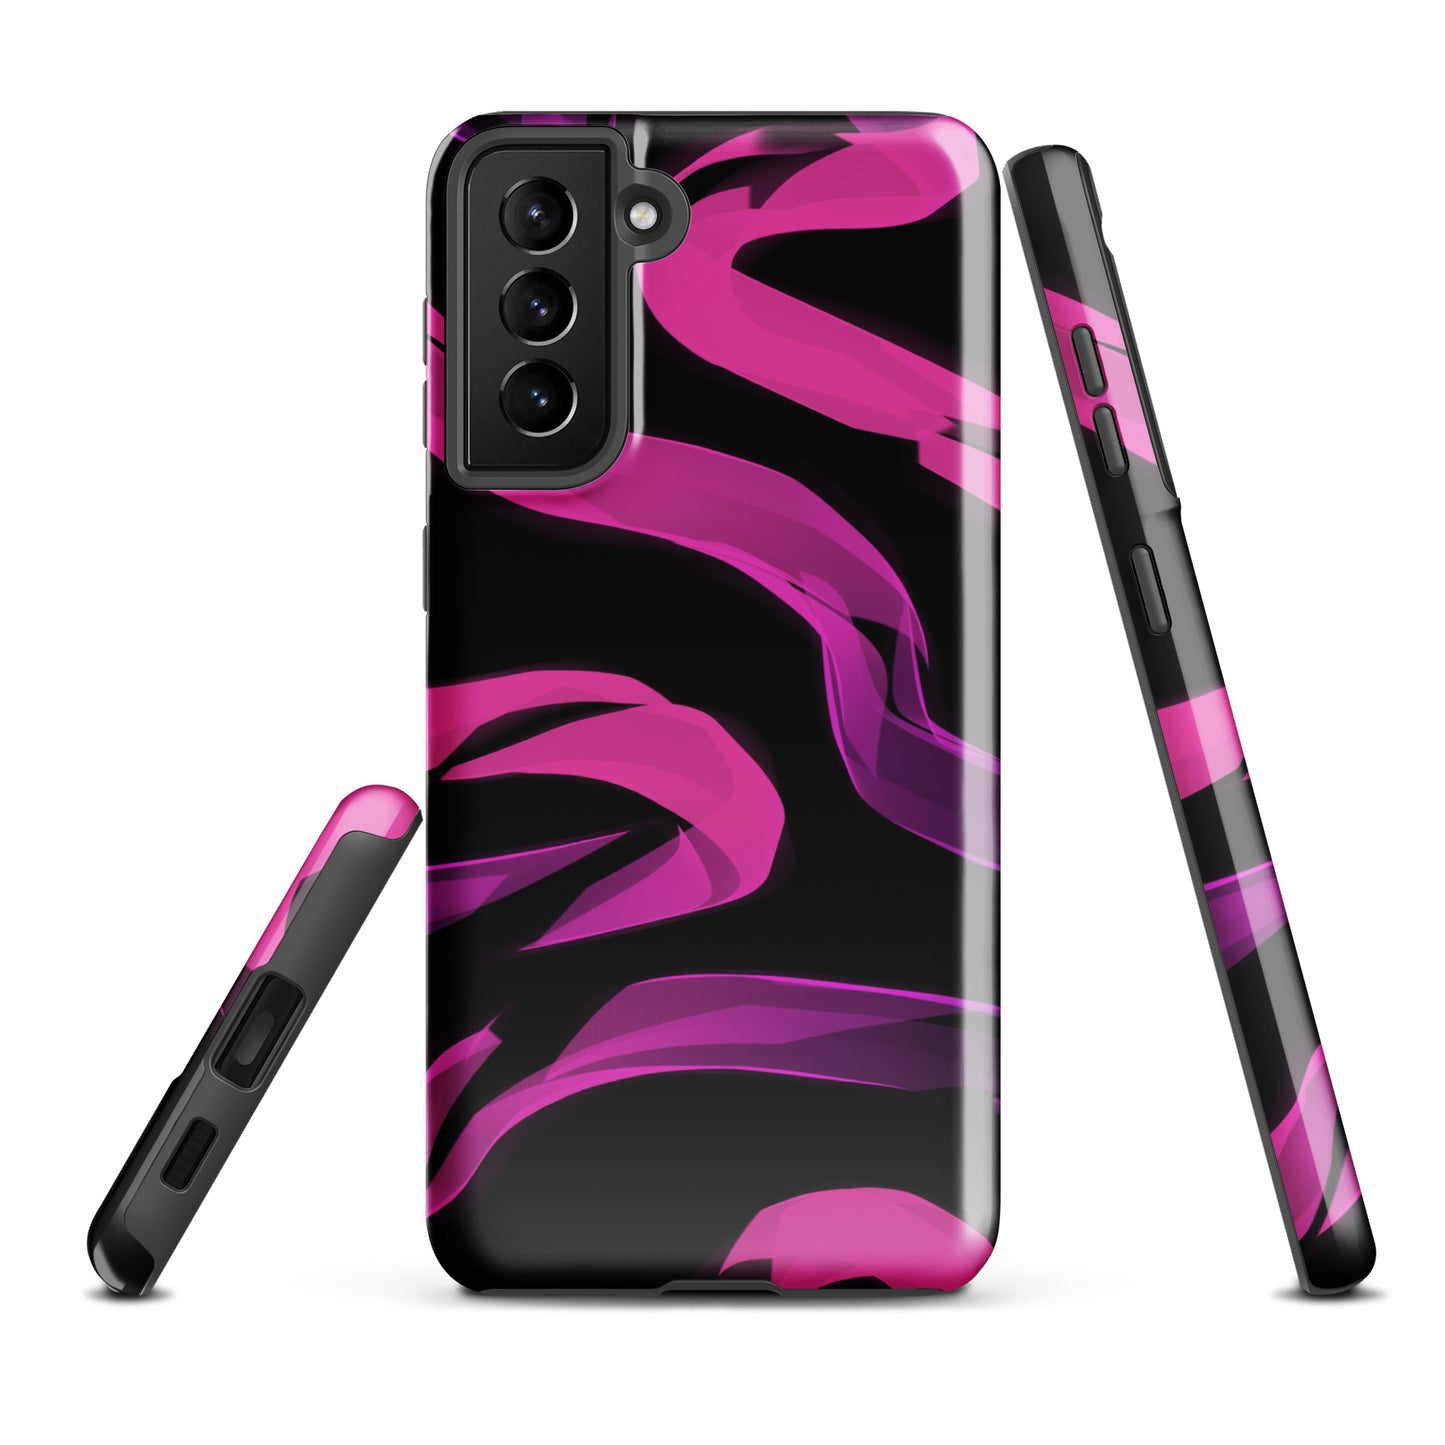 A Bright Pink Neon Sketch Case for the Samsung Galaxy S21 Plus